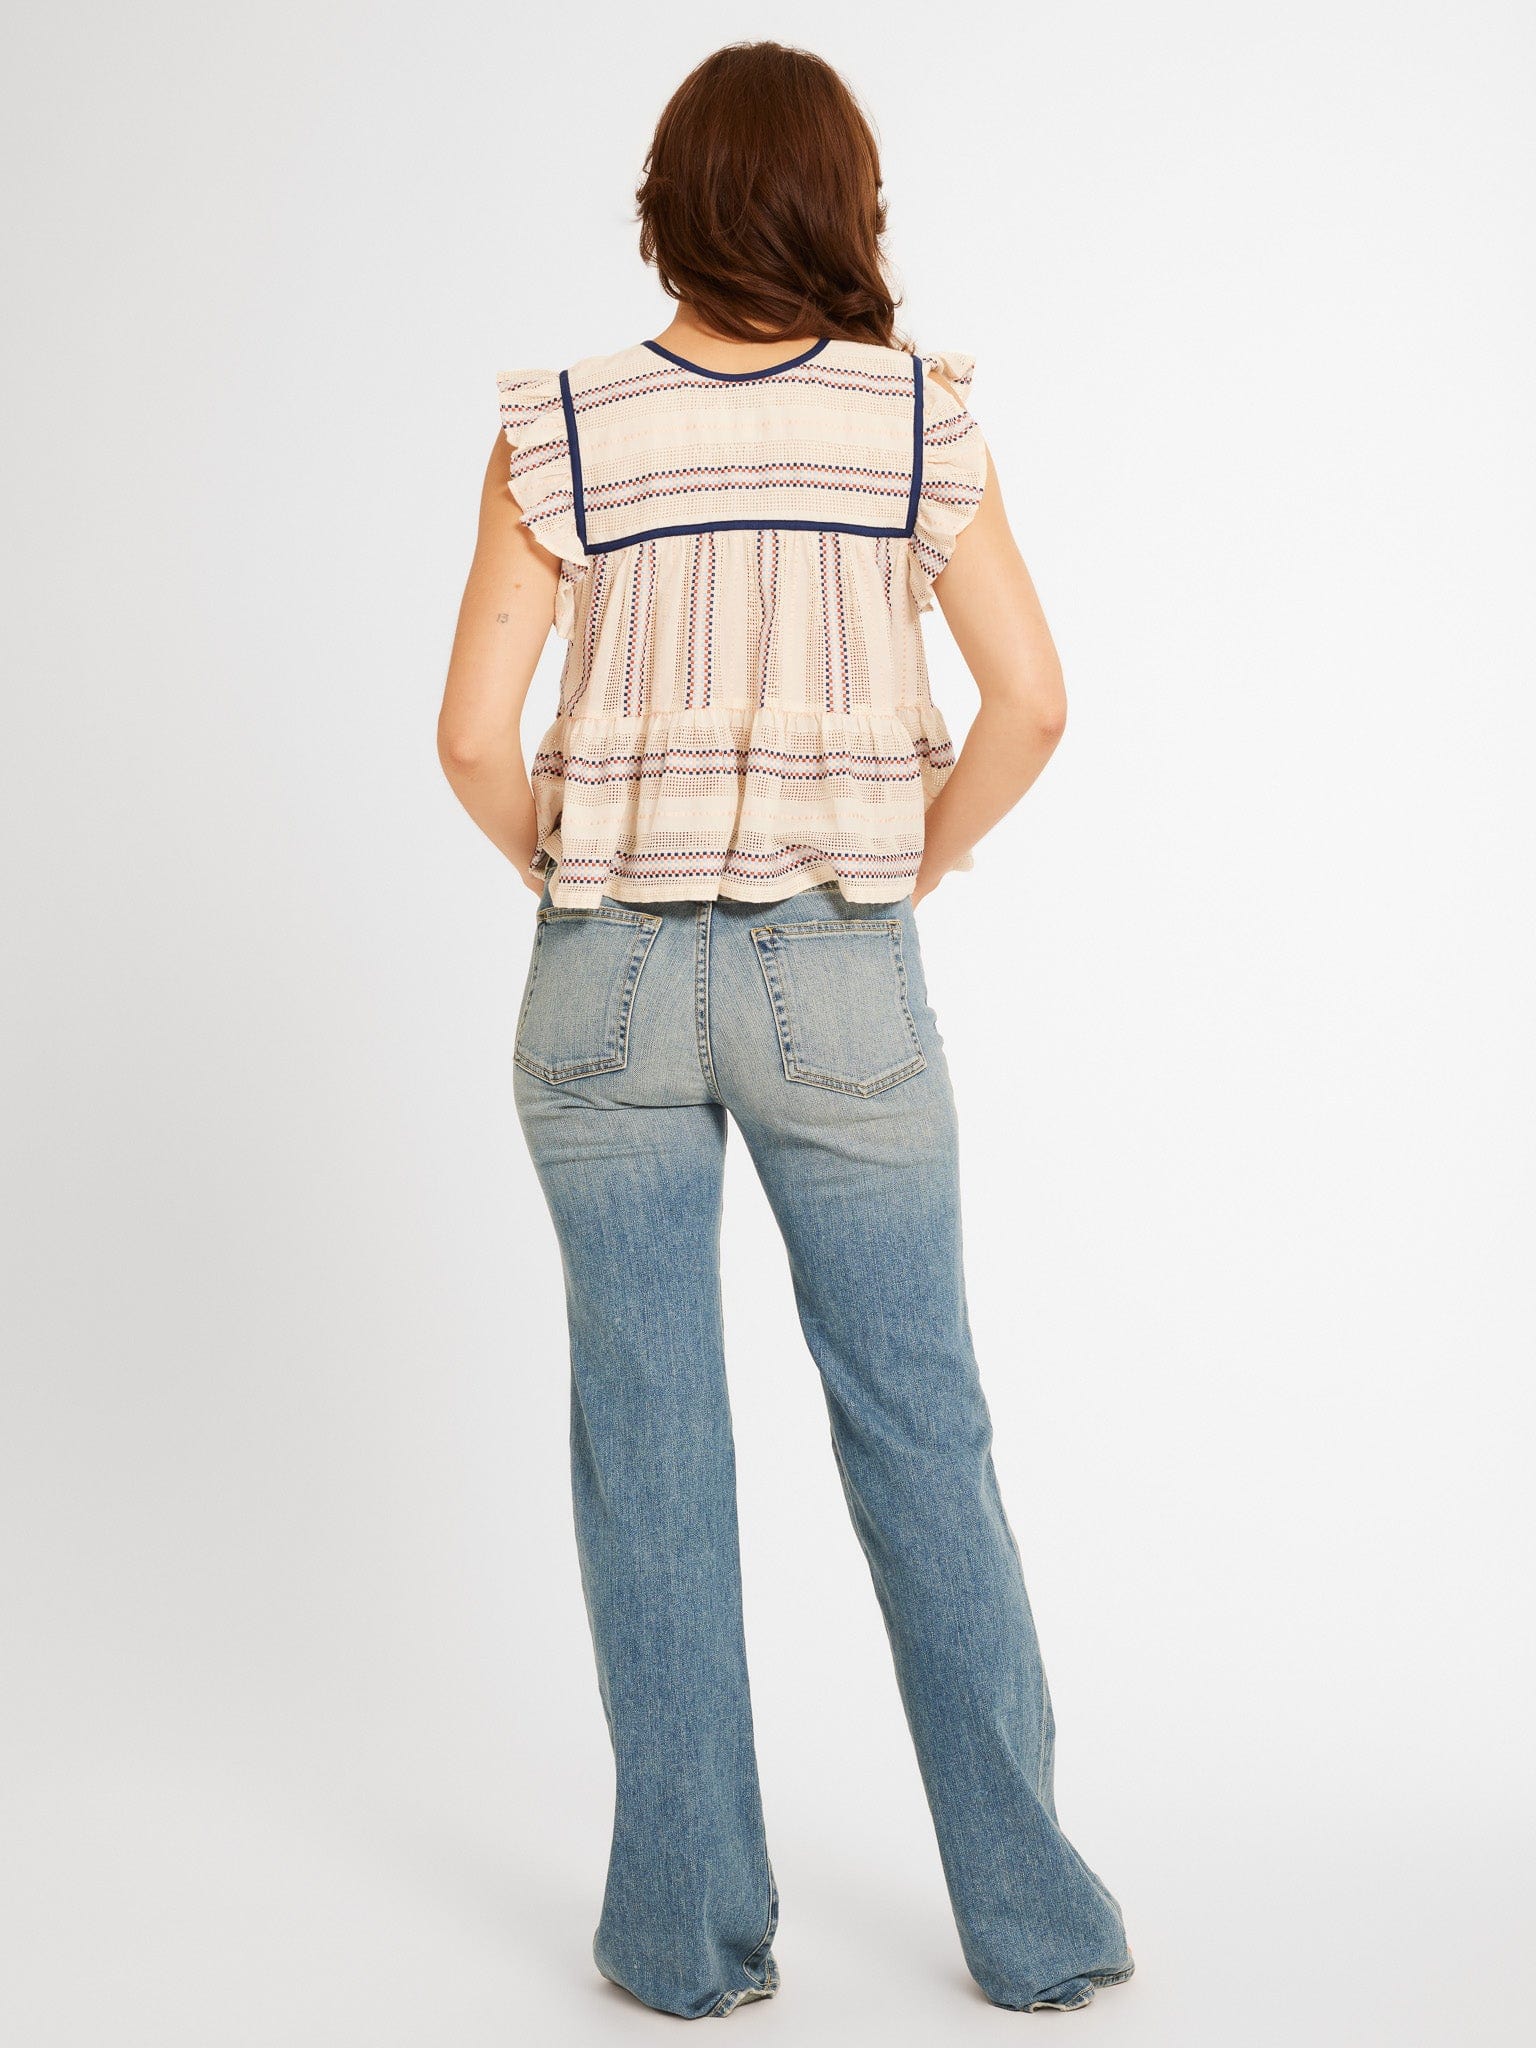 MILLE Clothing Chelsea Top in O'Keeffe Stripe